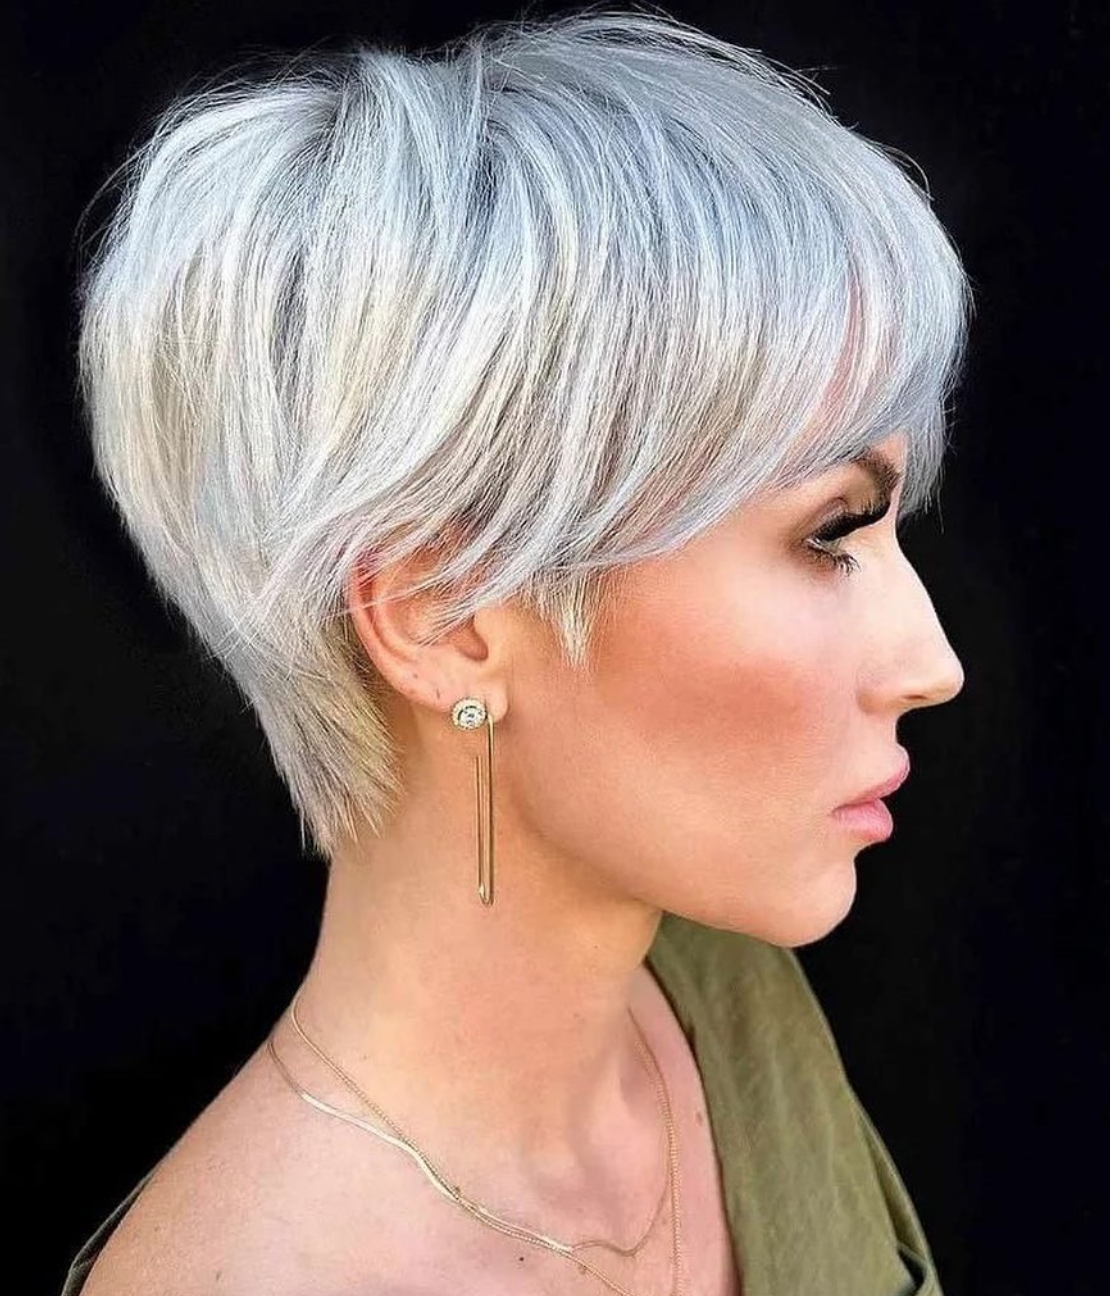 The side profile of a woman with long earrings and gray pixie cut. 